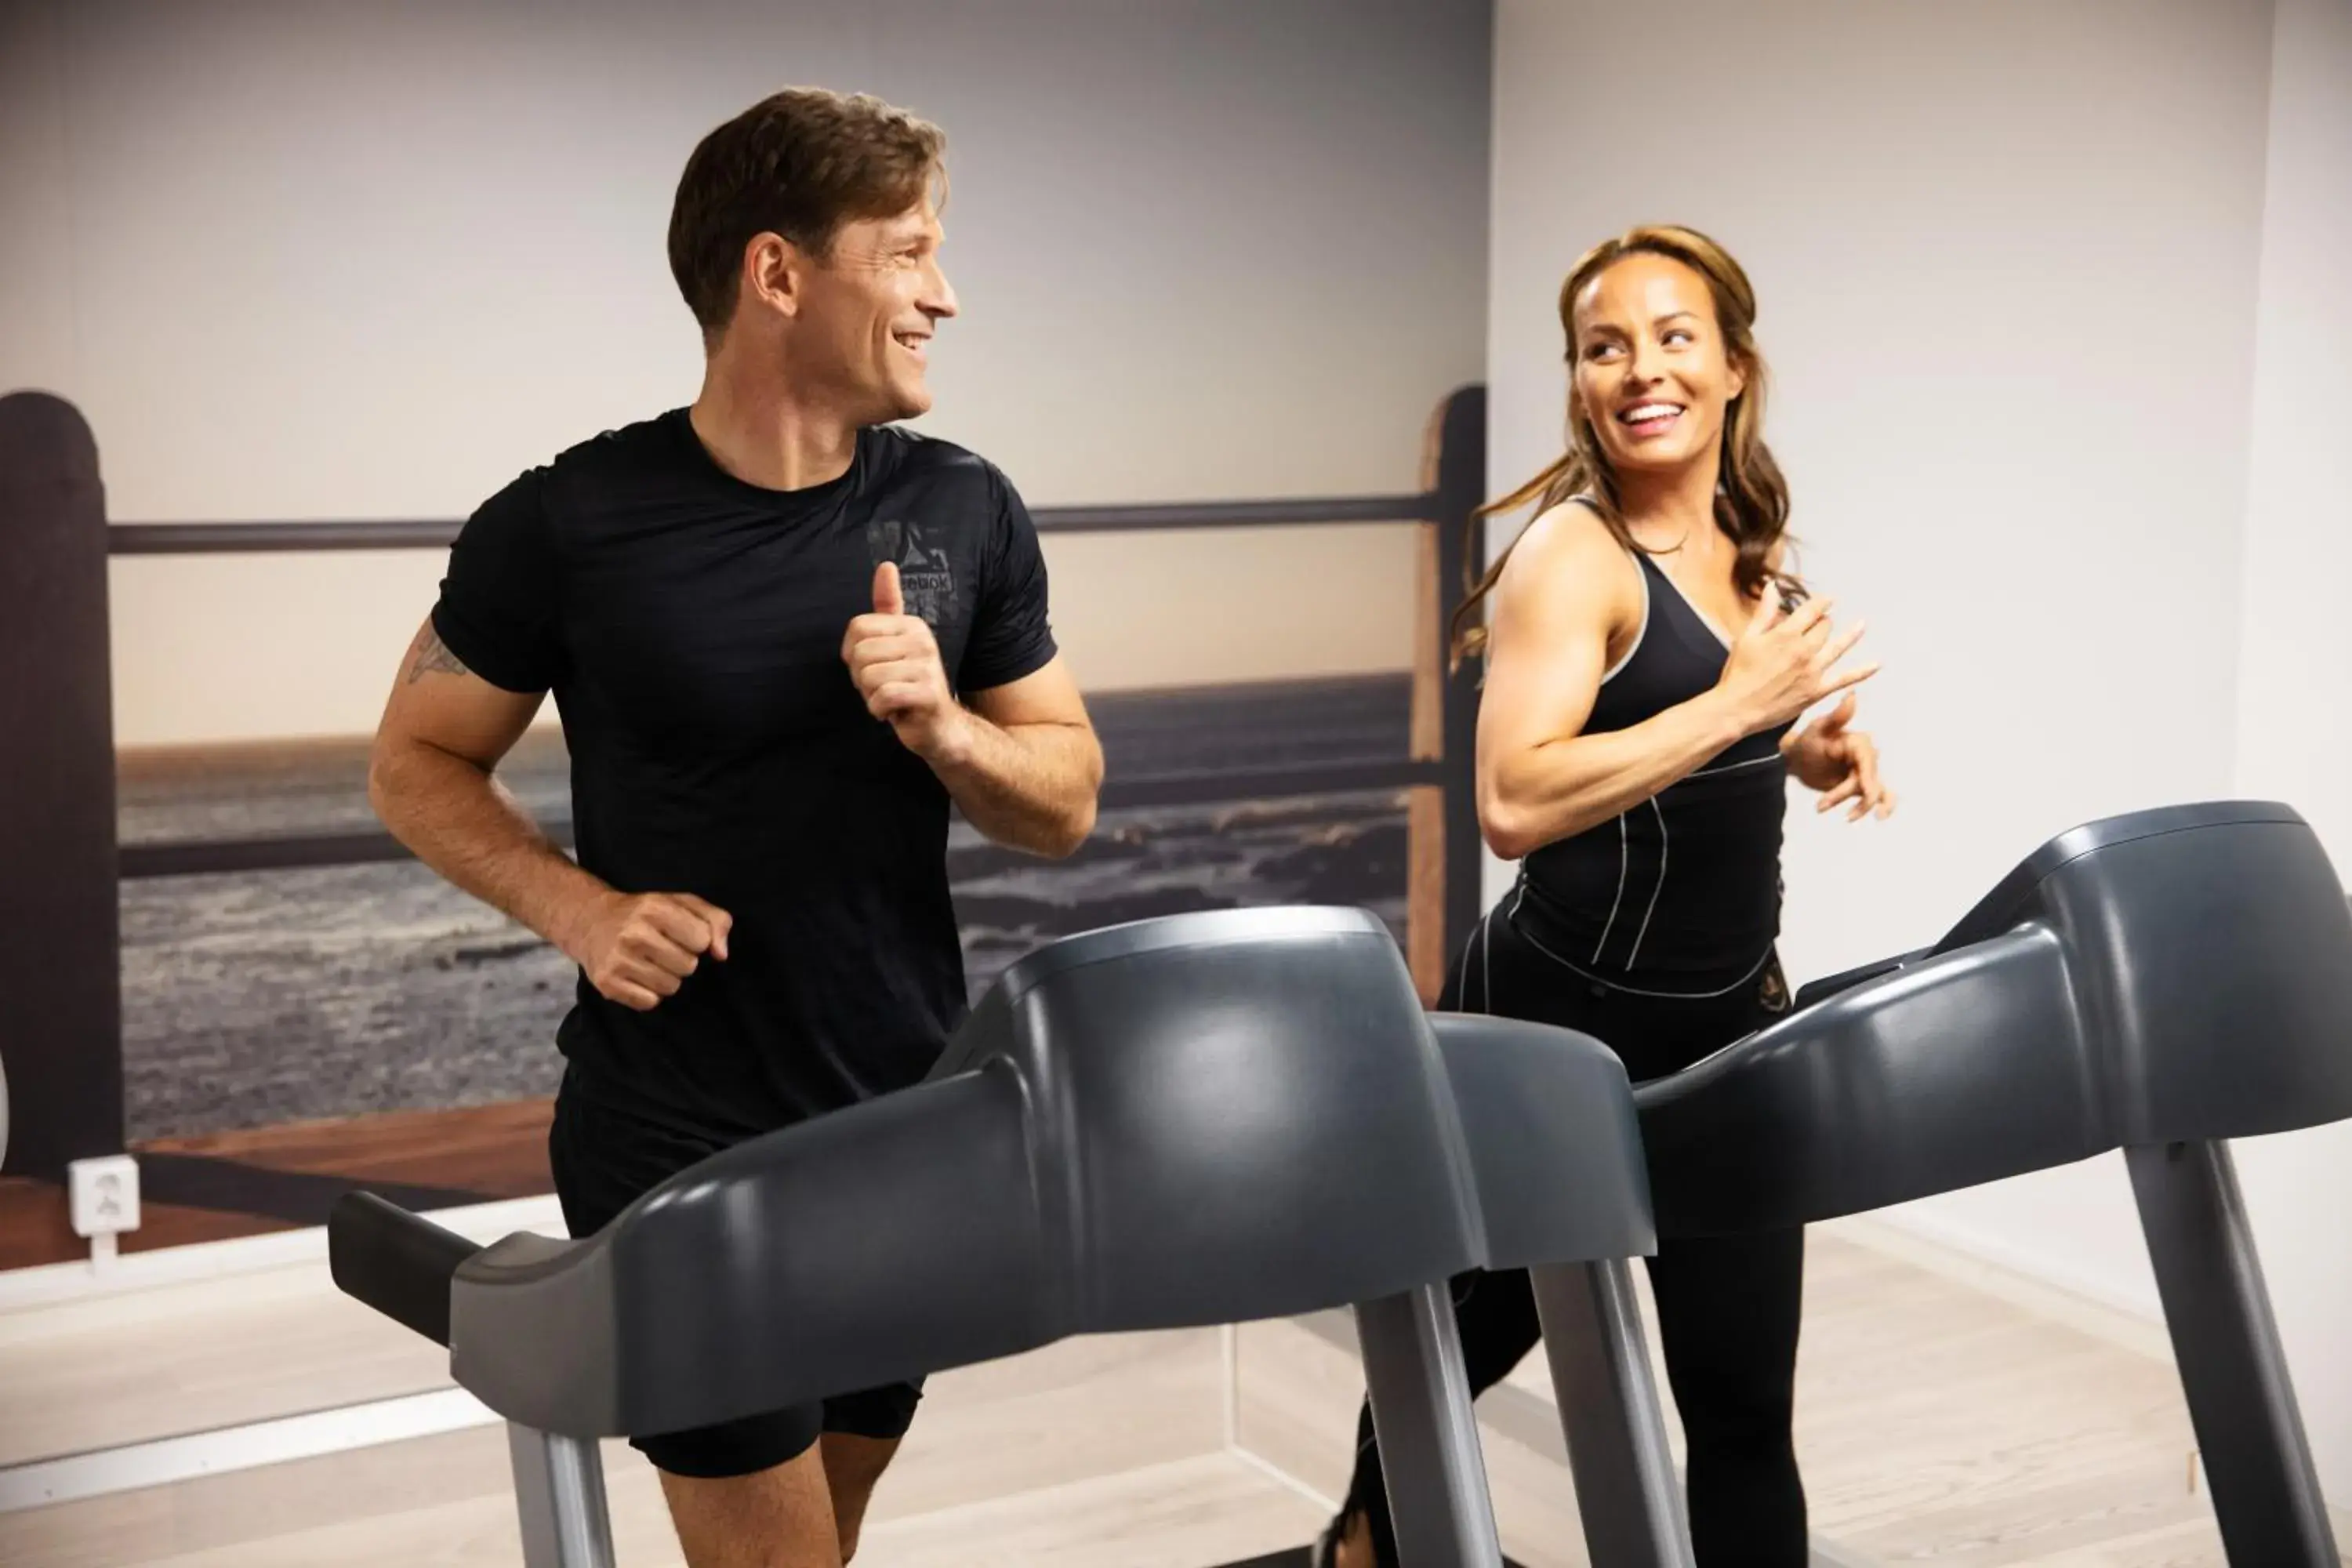 People, Fitness Center/Facilities in Welcome Hotel Barkarby